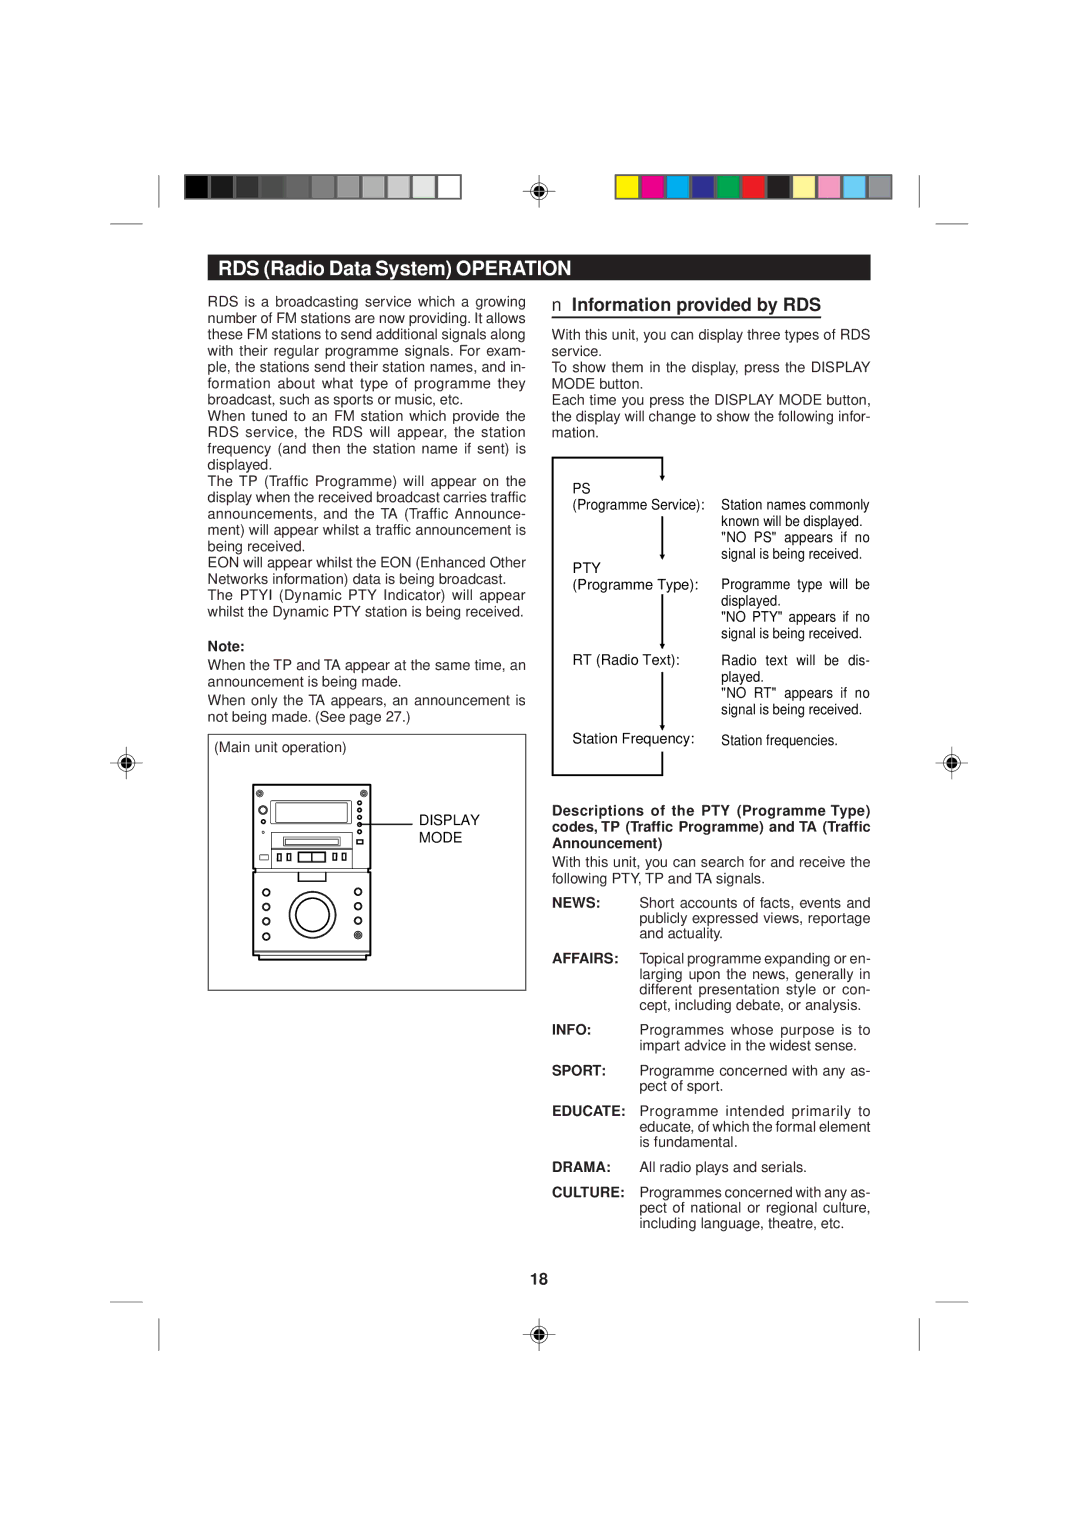 Sharp MD-M2H operation manual Information provided by RDS, Display Mode, Pty, RT Radio Text, Station Frequency 